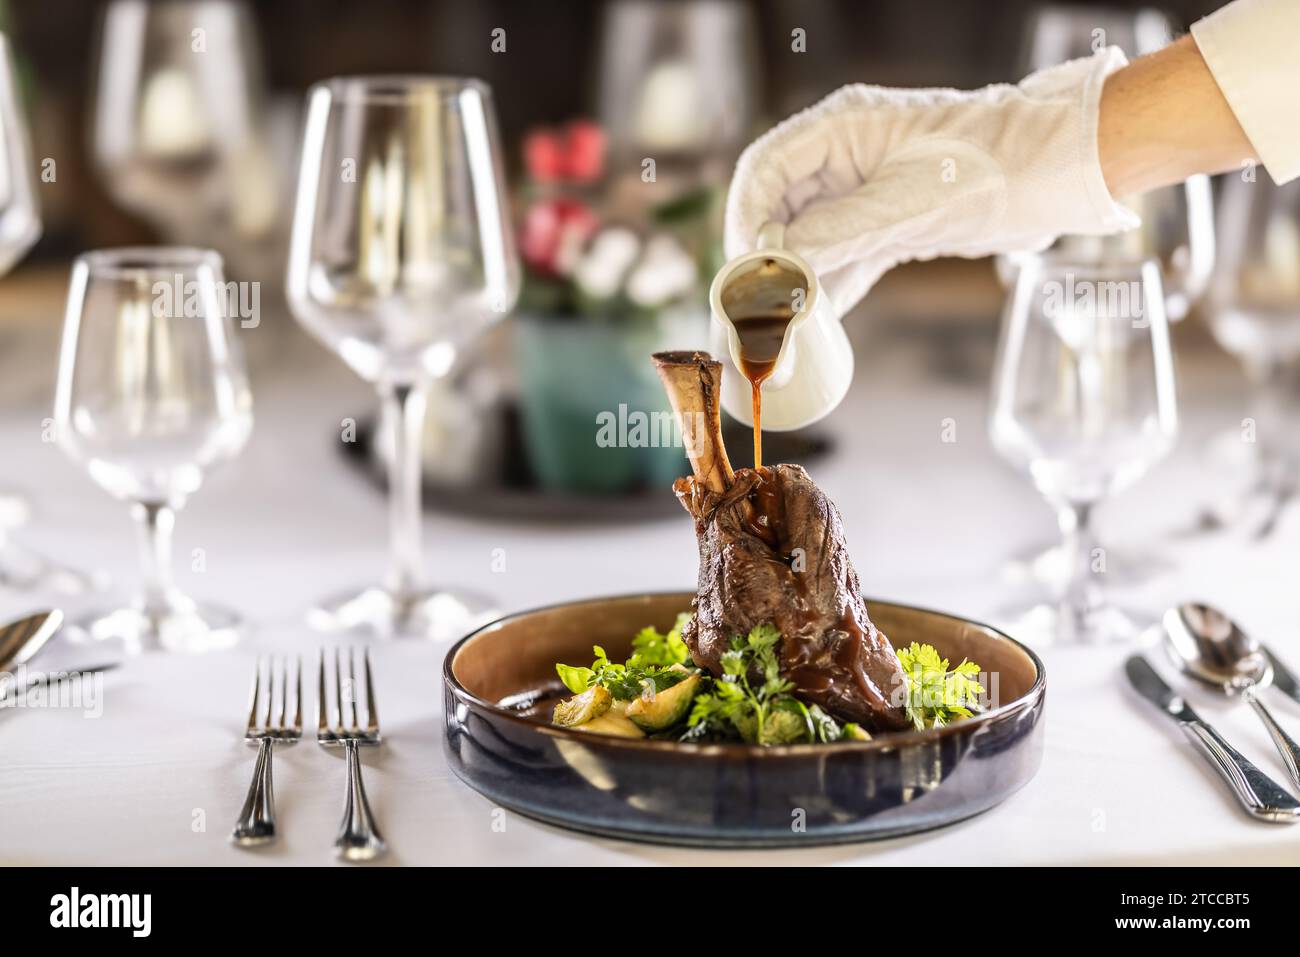 The chef or waiter finishes the meal right on the restaurant table, pouring the sauce over the leg of lamb confit. Stock Photo